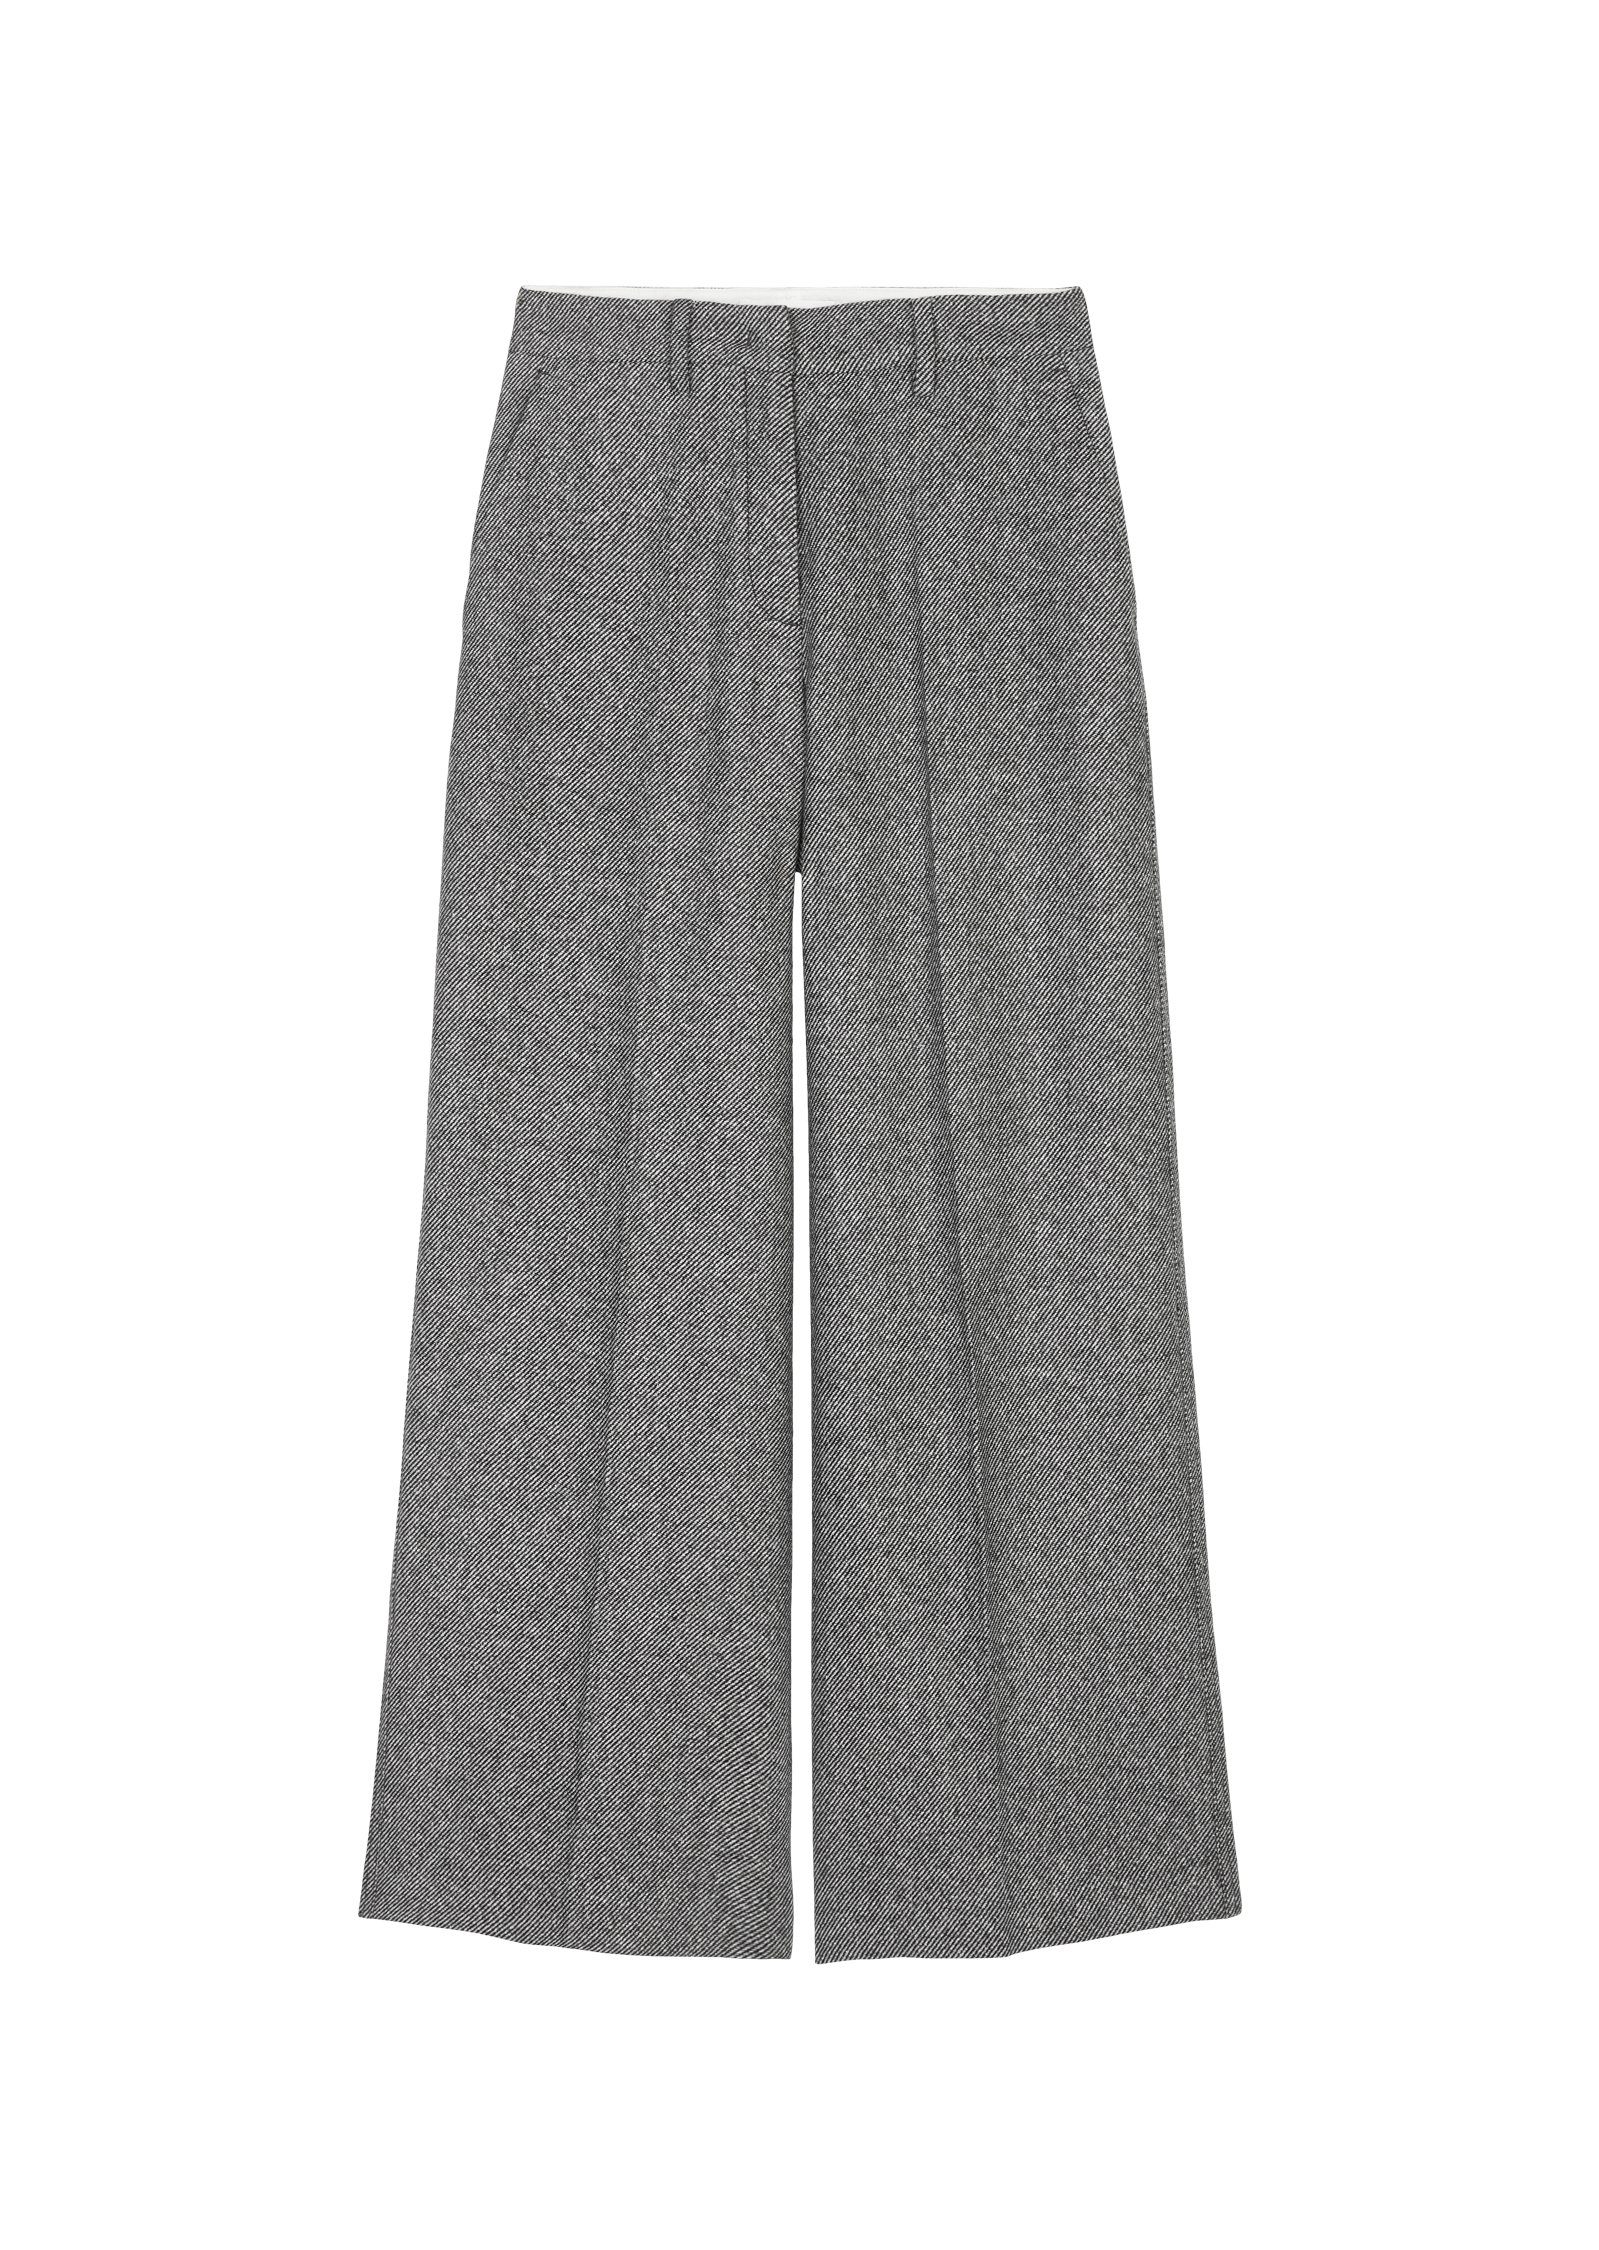 Marc h O'Polo Pants, fit, suiting Maxirock modern style,